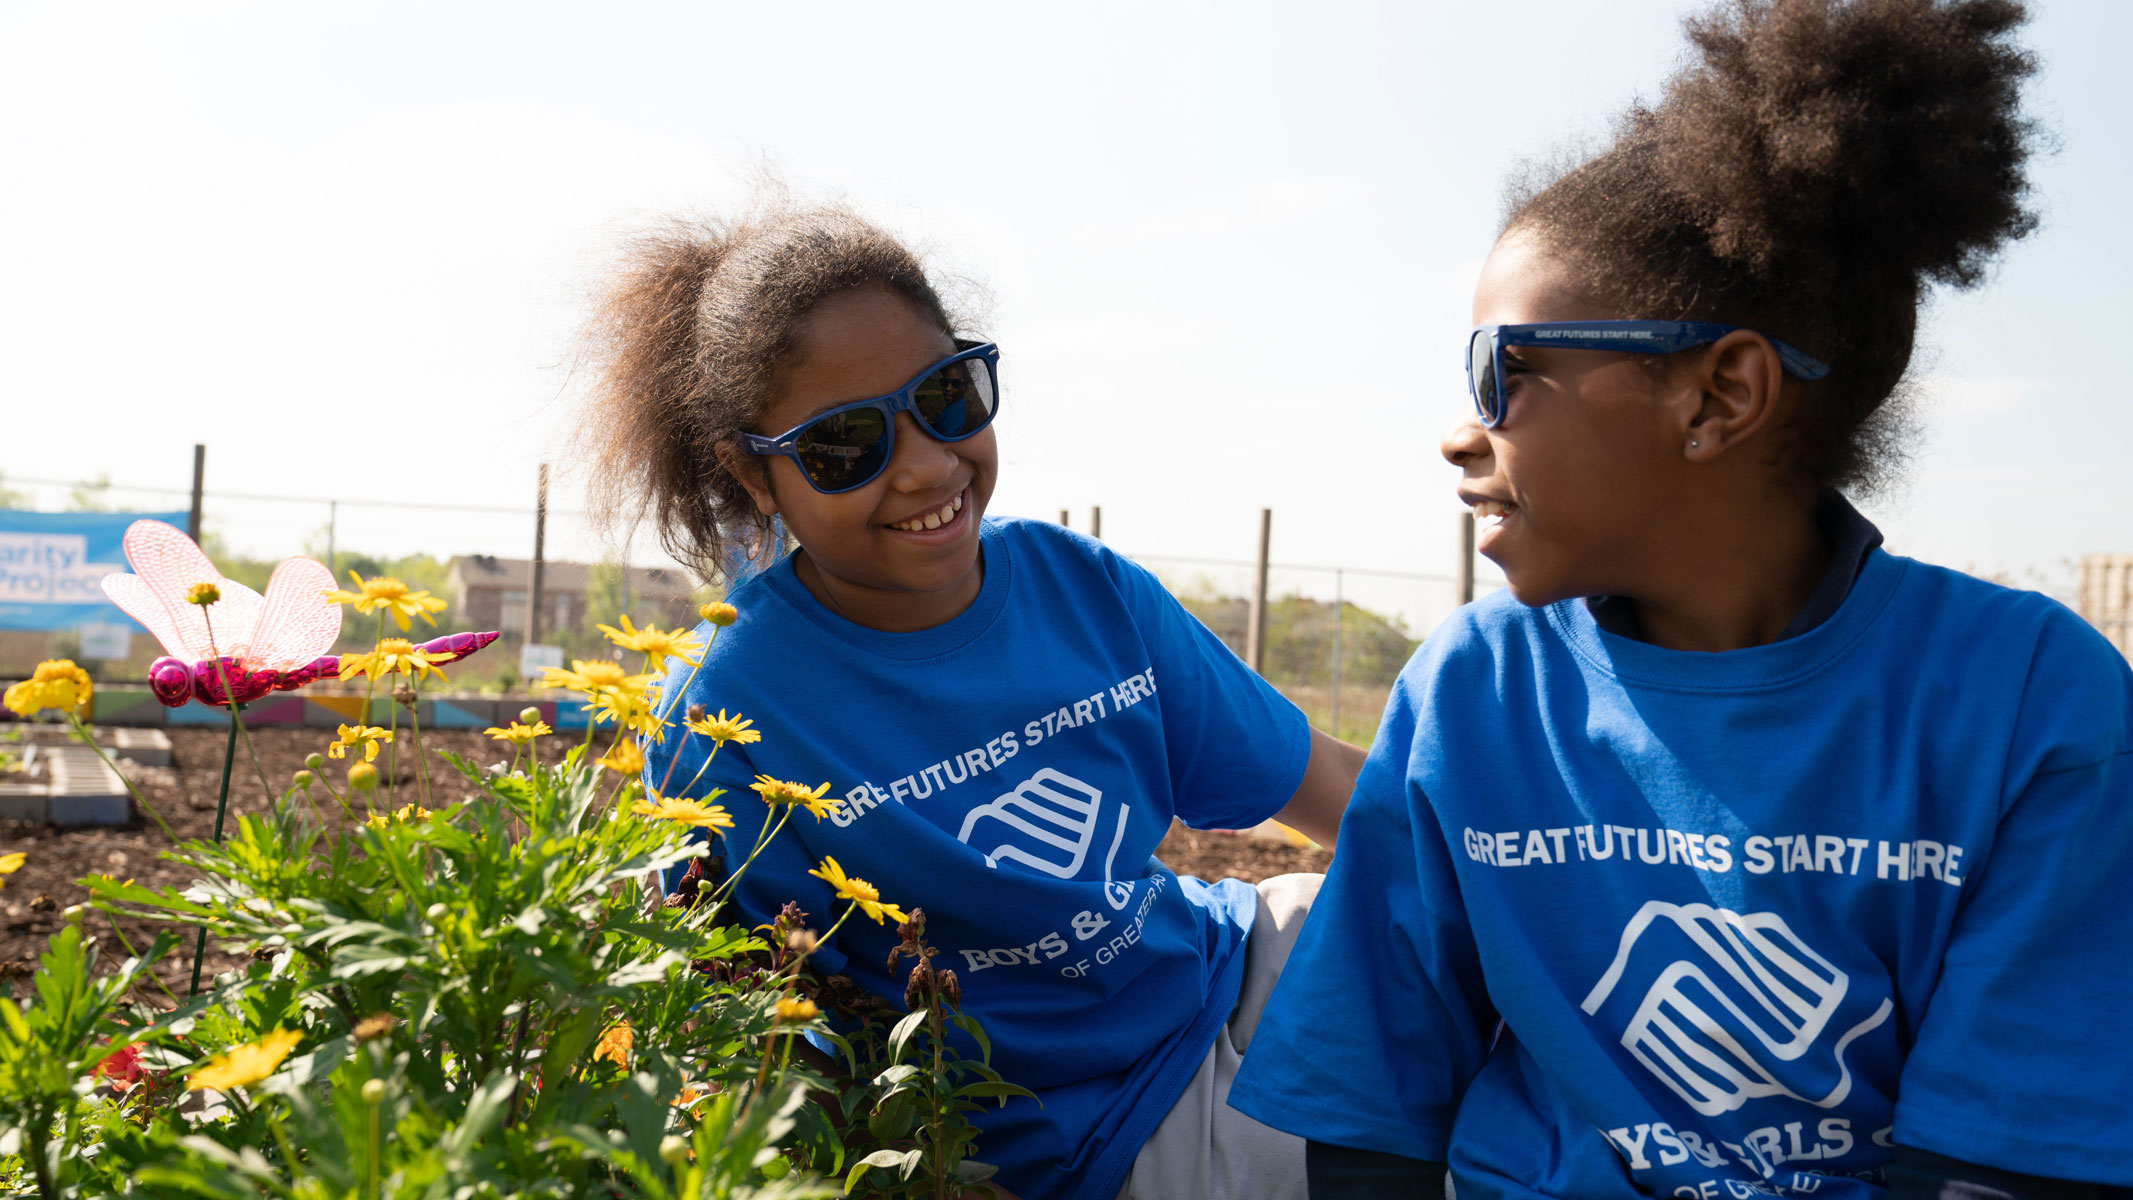 Boys and Girls club participants in a community garden.